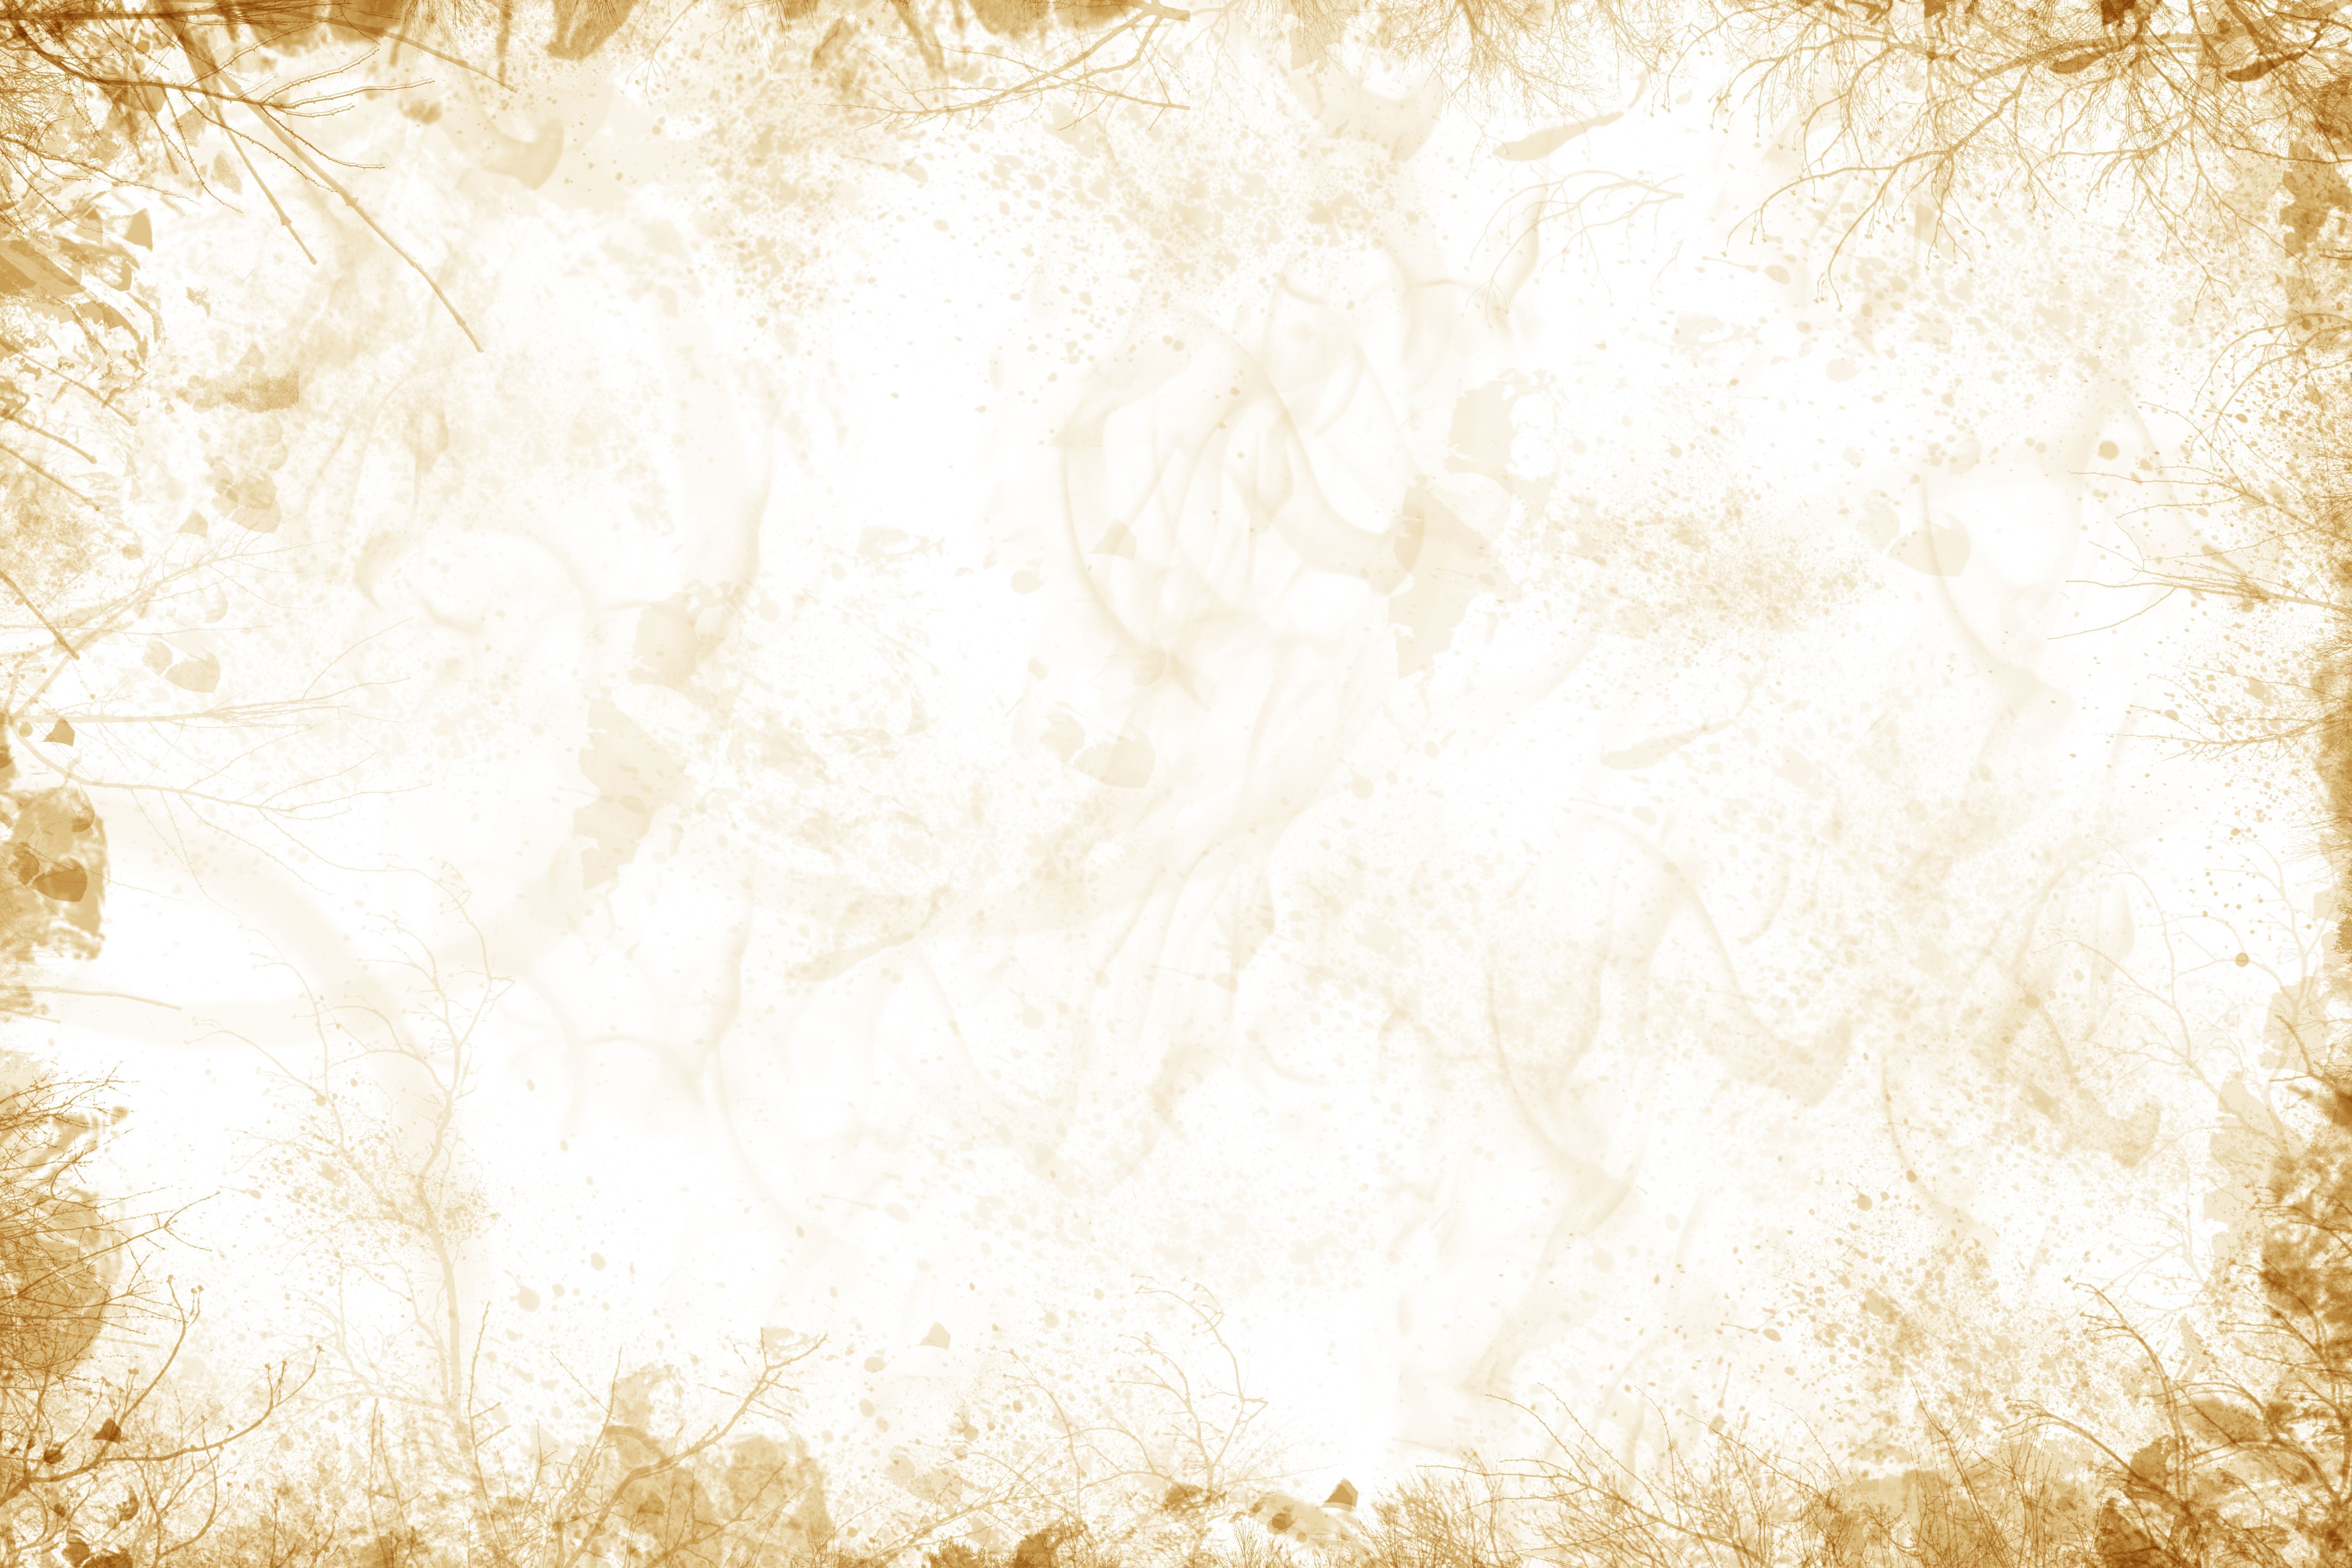 Texture Backgrounds - Funeral Prayer and Memorial Cards